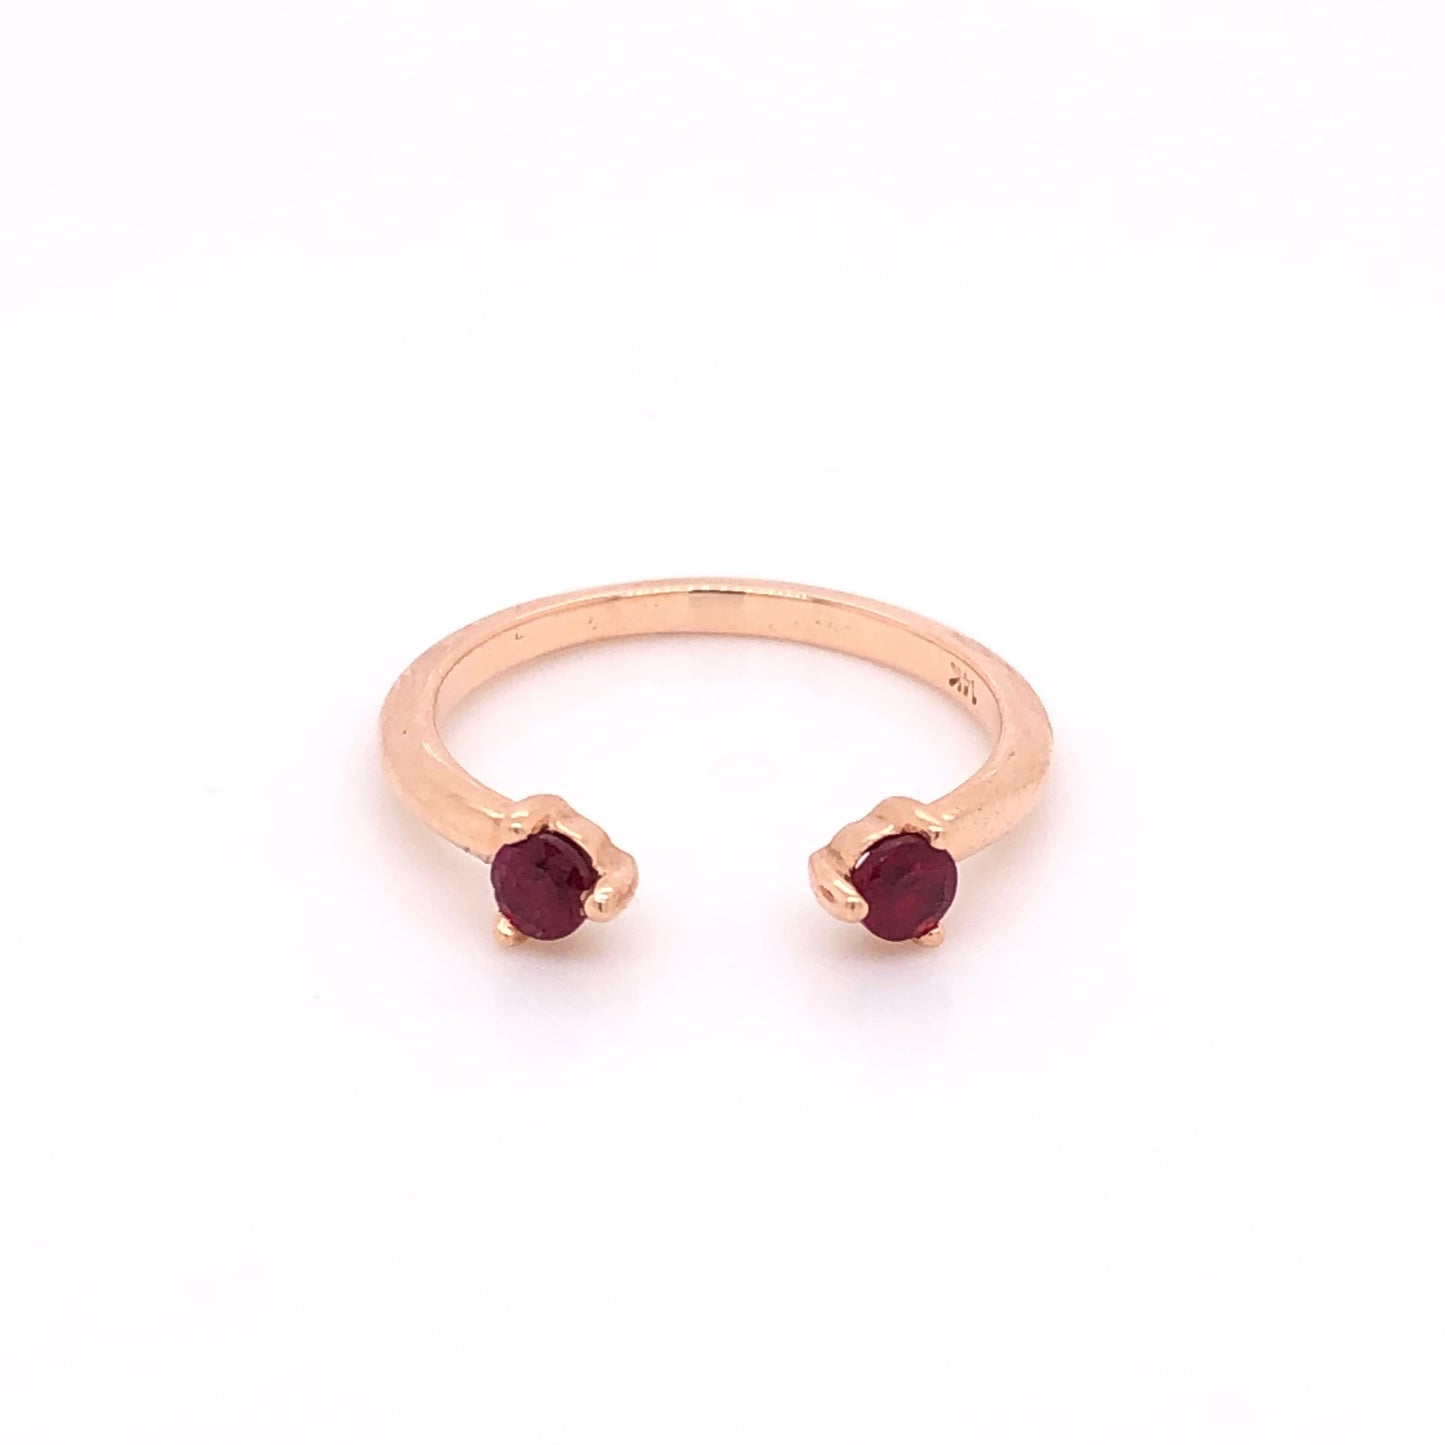 IMMEDIATE DELIVERY / Eva Ring with Rubi / 14k Rose Gold / Size 6.5